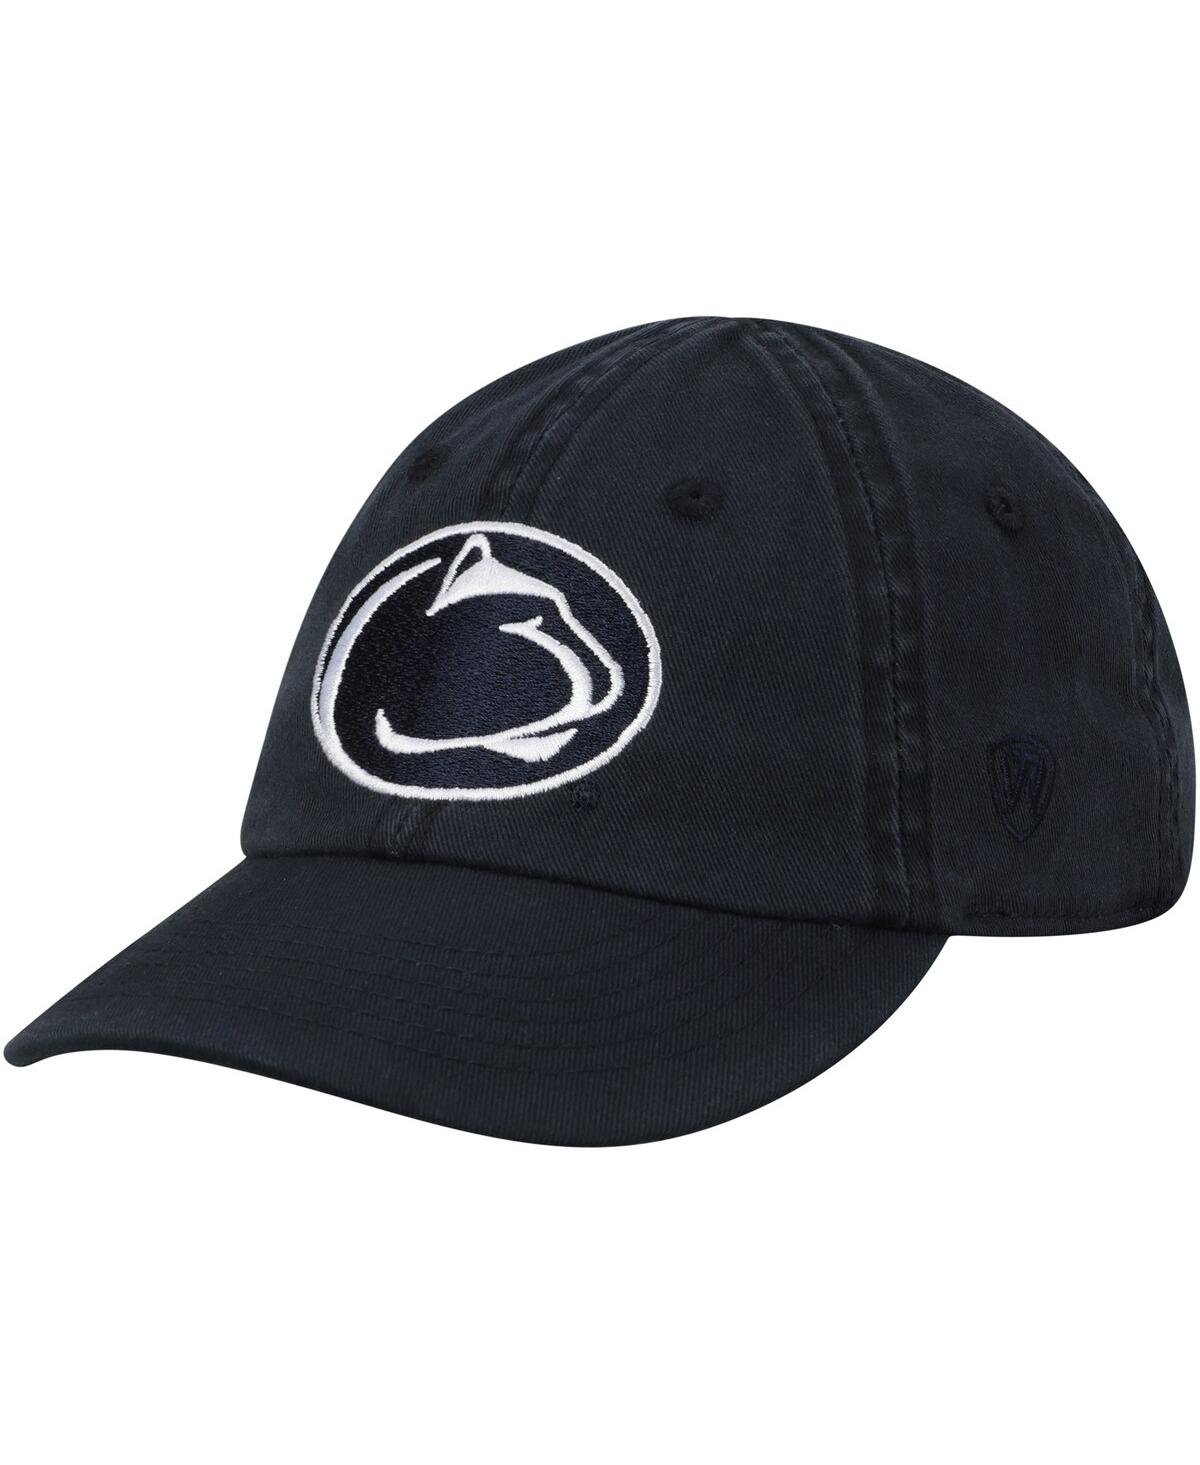 Top Of The World Babies' Infant Unisex  Navy Penn State Nittany Lions Mini Me Adjustable Hat